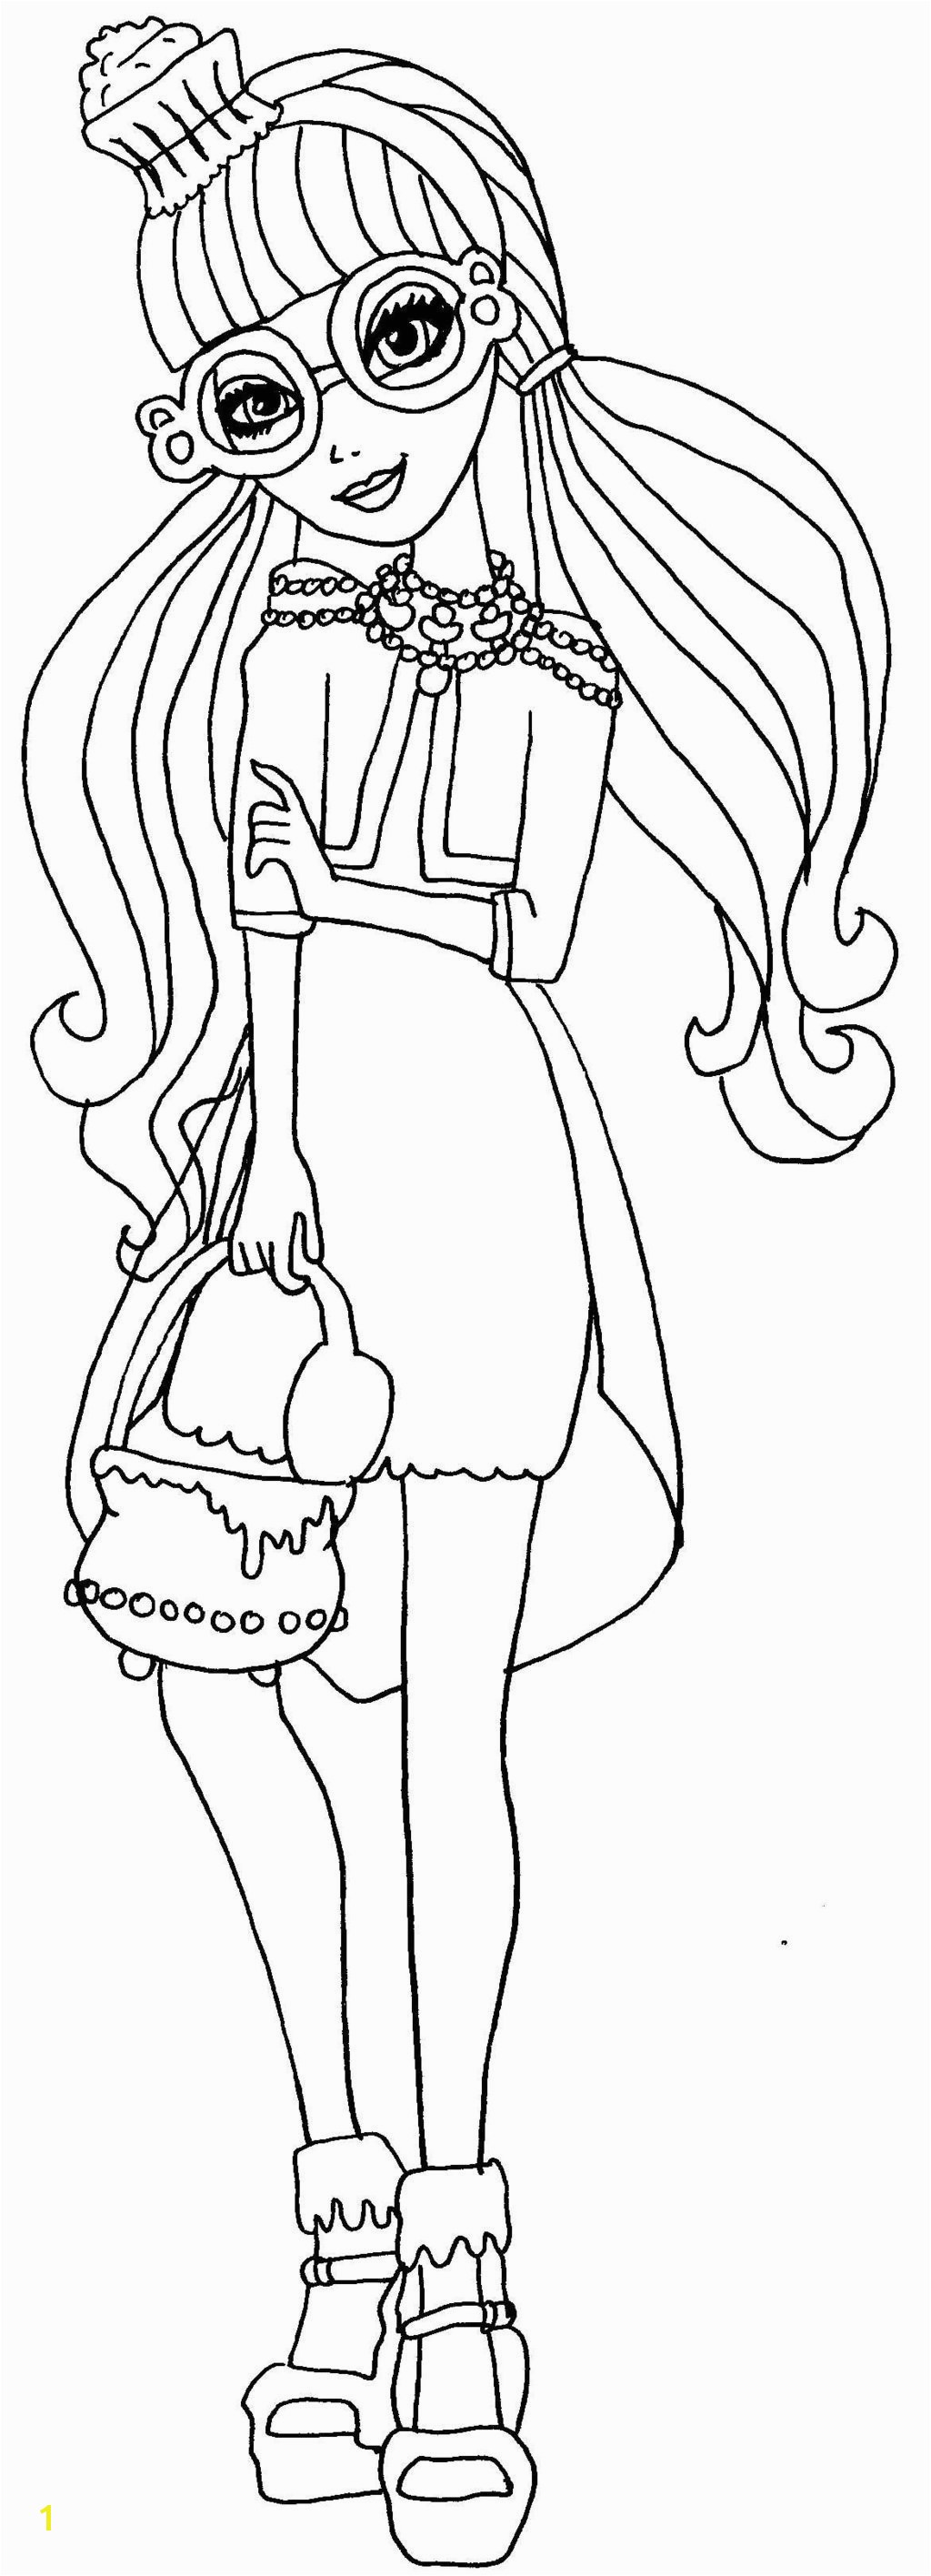 Ever after High Lizzie Hearts Coloring Pages Elegant Ever after High Coloring Pages Apple White Katesgrove